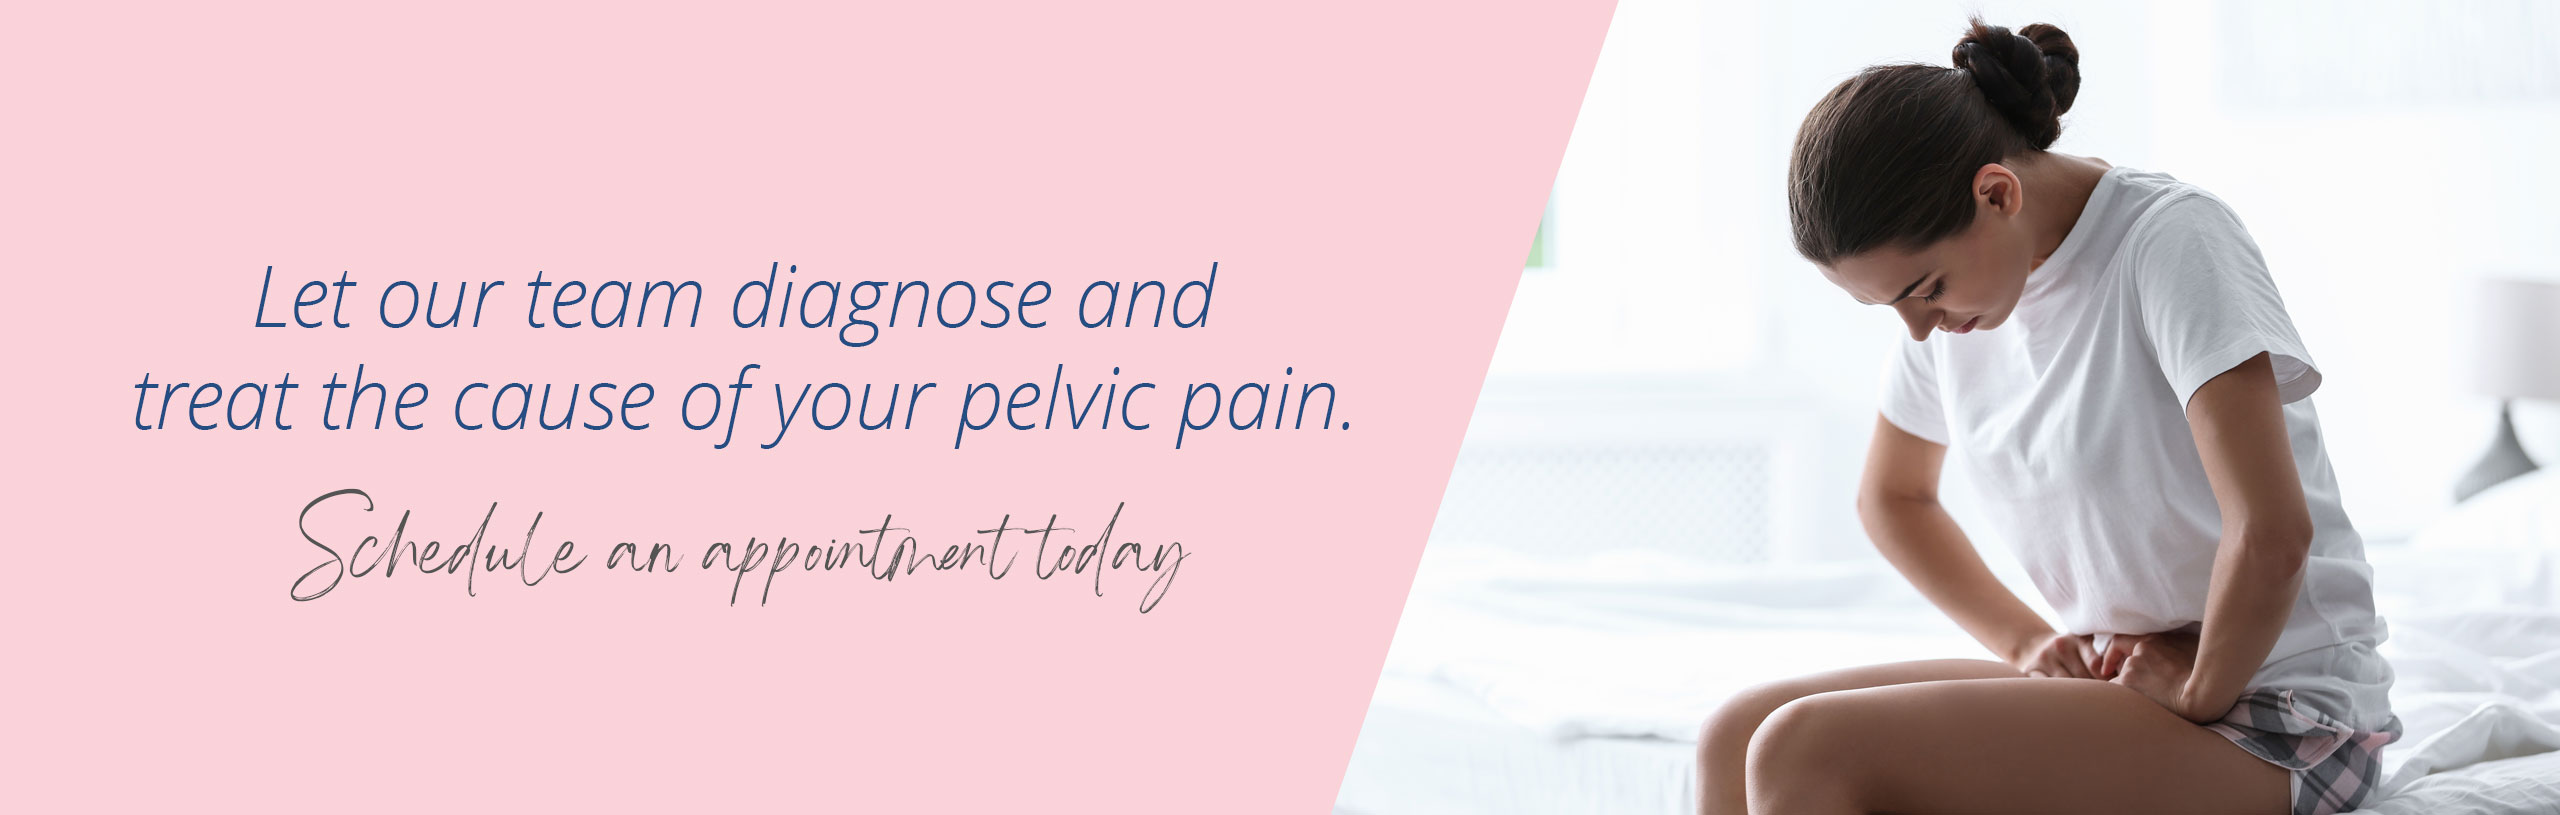 Let our team diagnose and treat the cause of your pelvic pain.
Schedule an appointment today